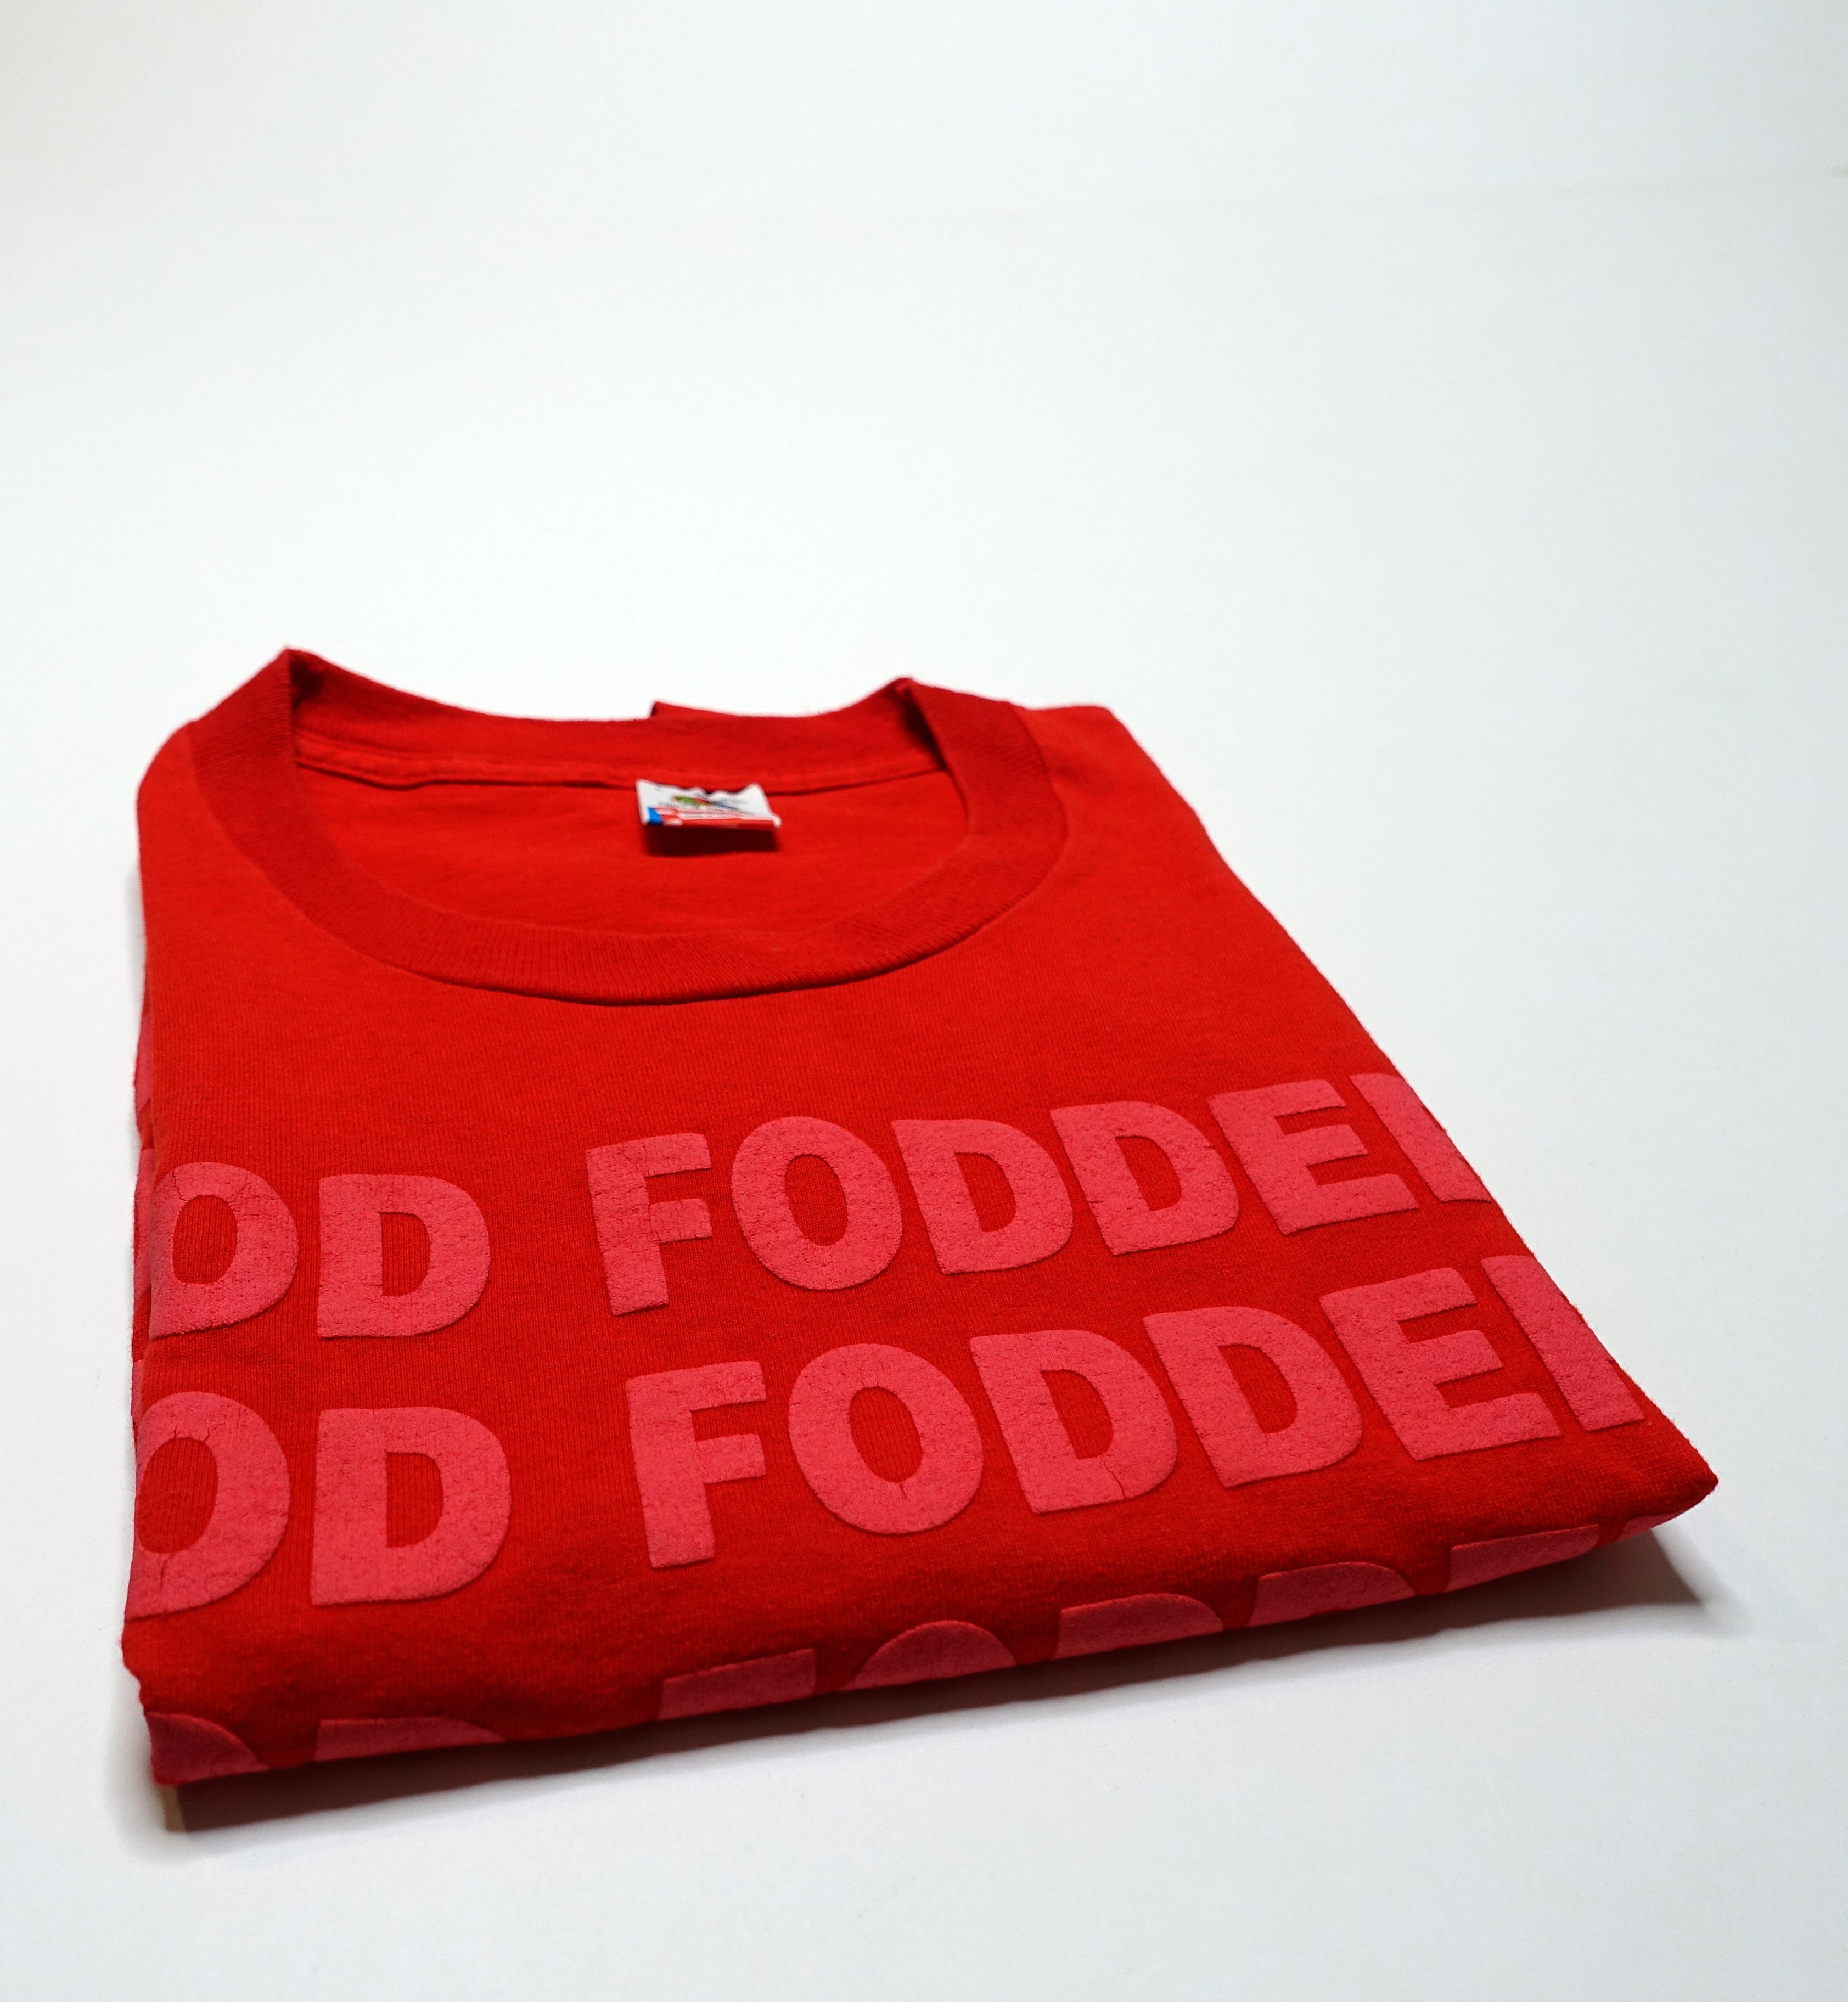 Ned's Atomic Dustbin - God Fodder Repeater 1992 Tour Shirt Size Large